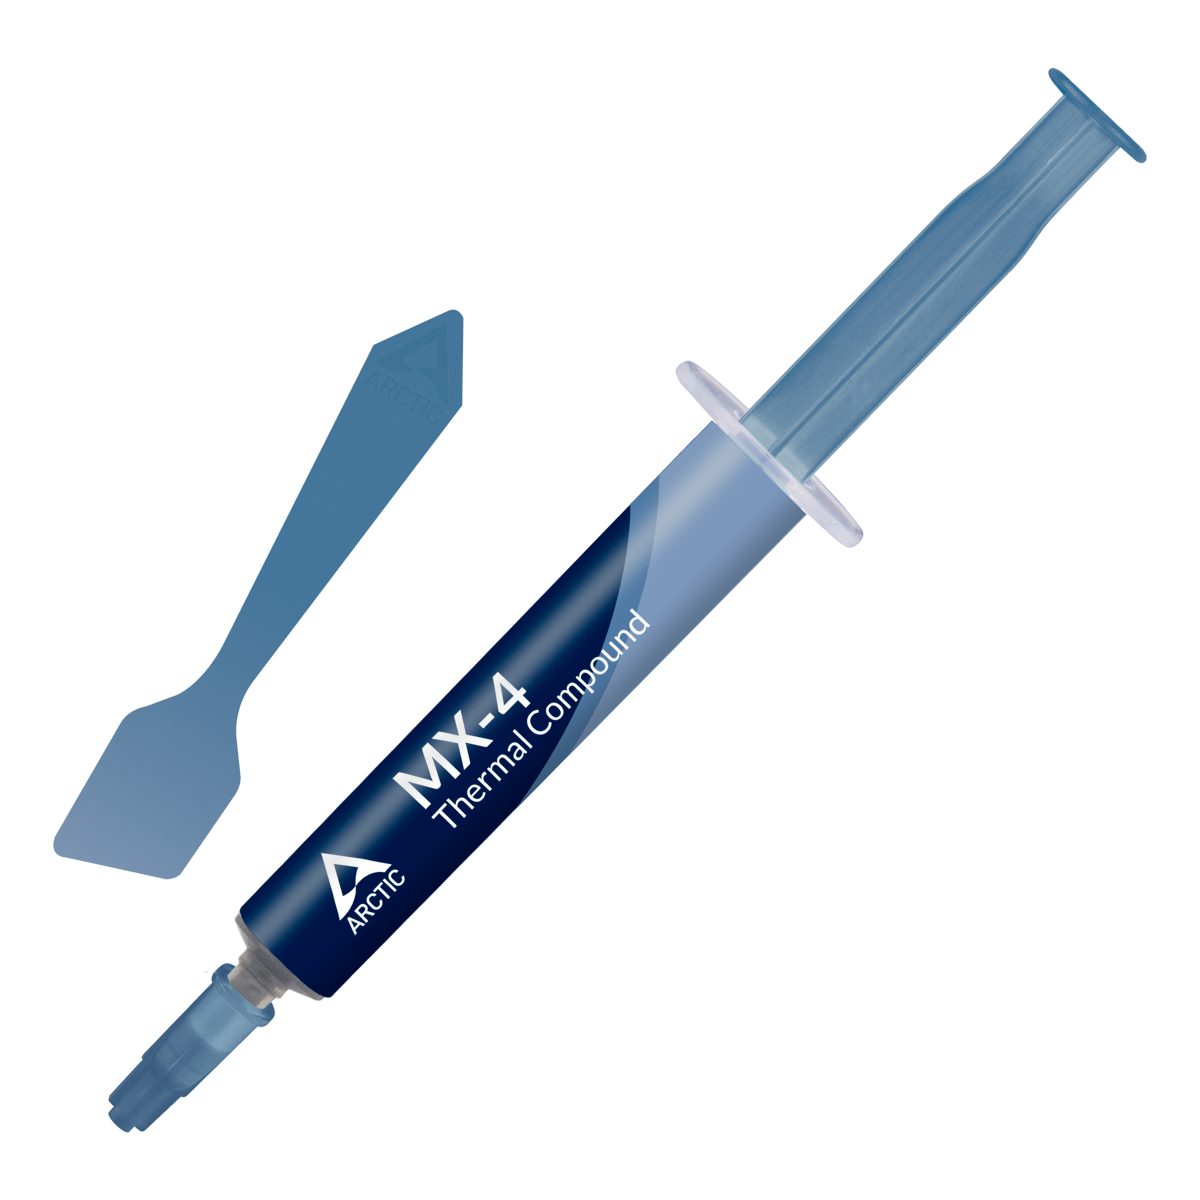 ARCTIC MX-4 4g - High Performance Thermal Compound with Spatula - Arctic 2.35.64.01.024